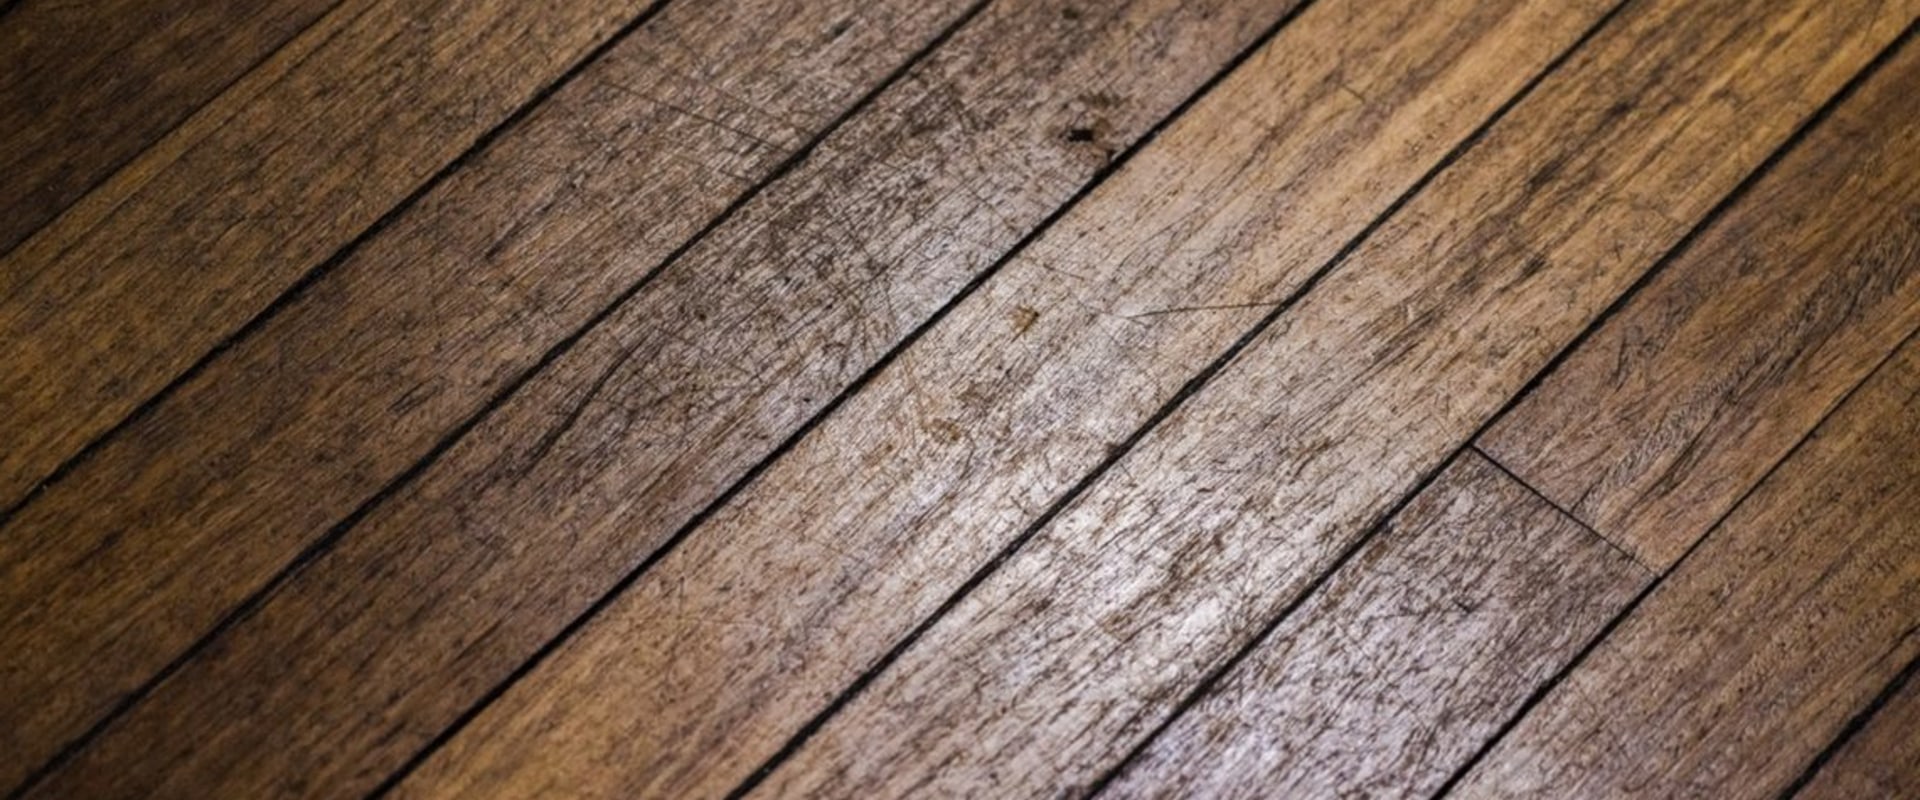 The Pros and Cons of Wooden Flooring